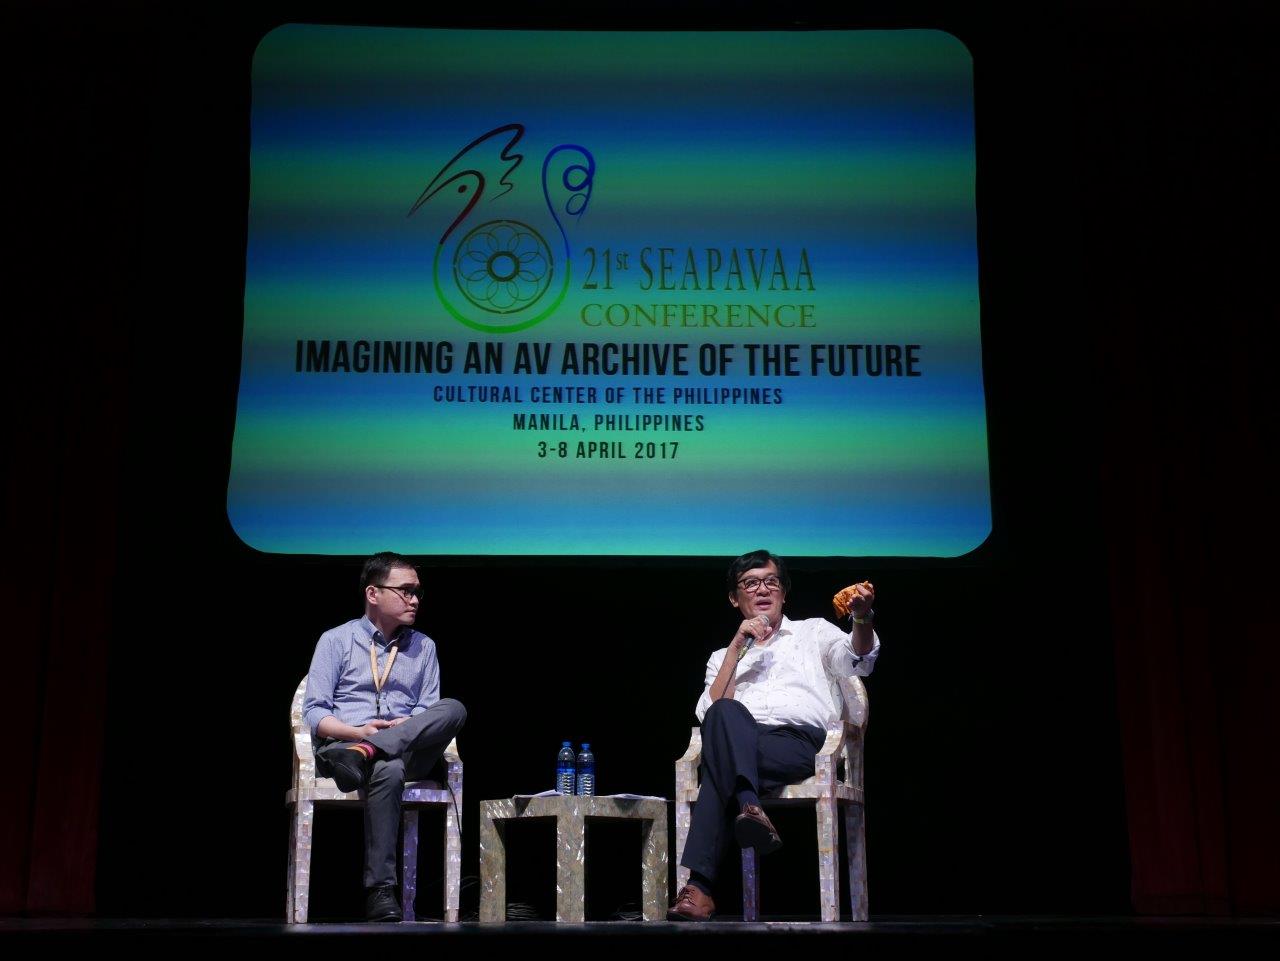 Nick Deocampo (Tisch Cinema Studies MA, '89) gave a Keynote Lecture at the Conference, moderated by Benedict ‘bono’ Salazar Olgado (MIAP '12).